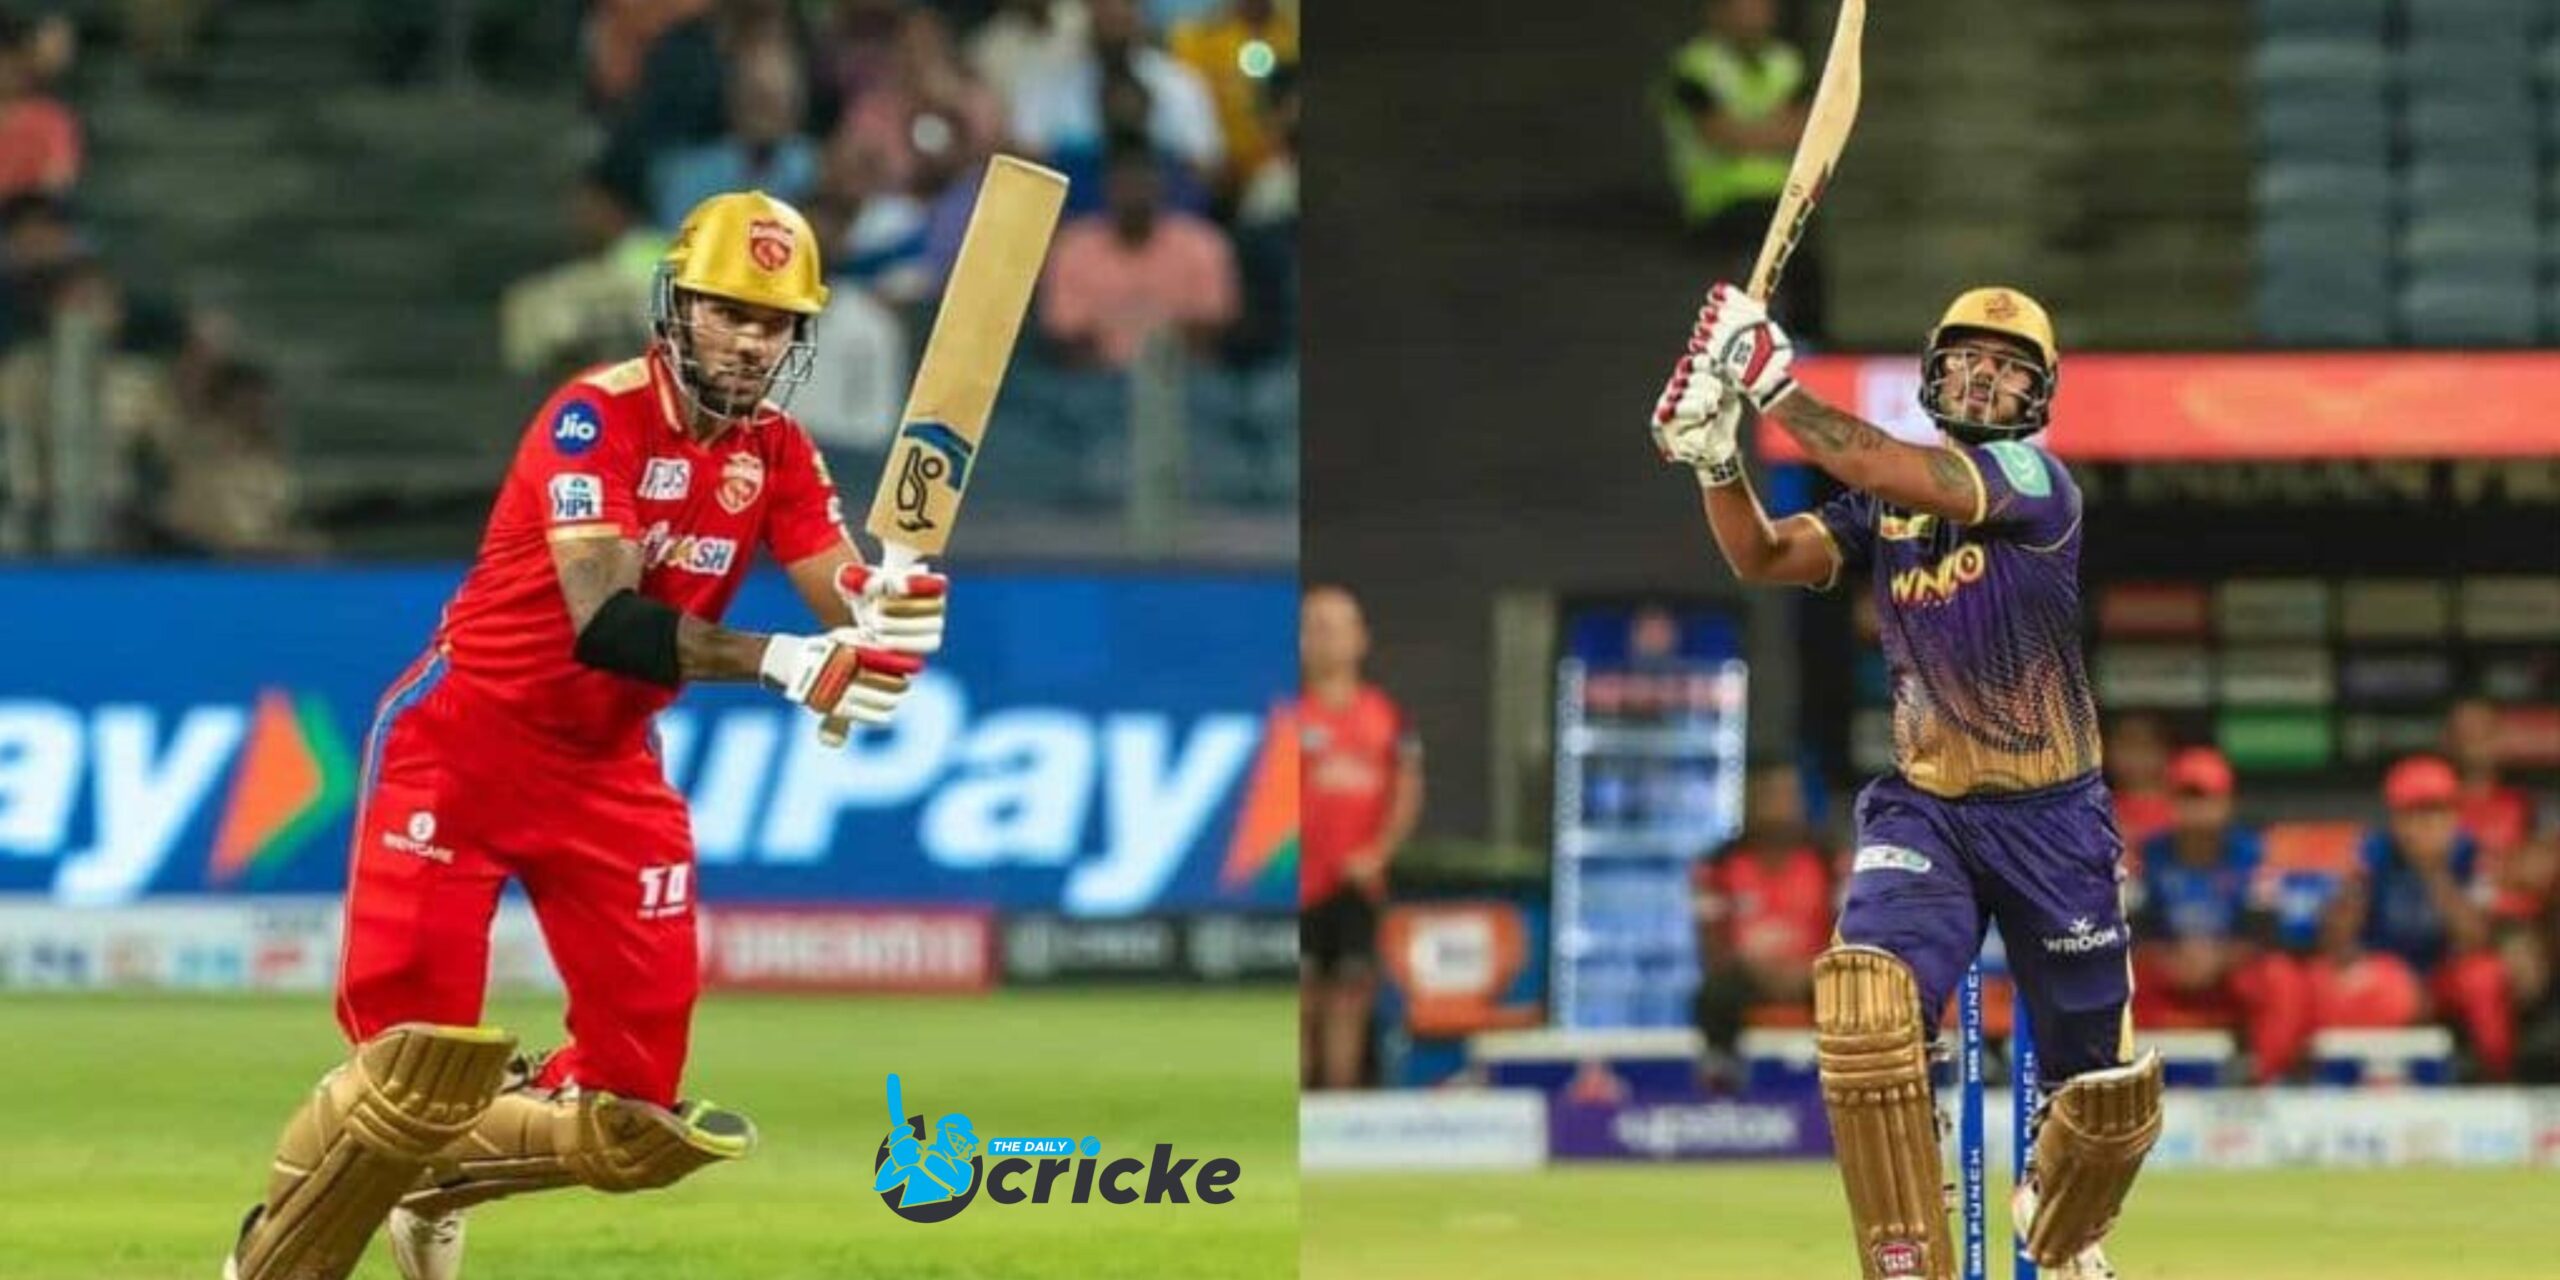 KKR vs PBKS Match Today: Bairstow Scores a Ton, Shashank and Prabsimran Hit Fifties in Historic 262 Run Chase Victor